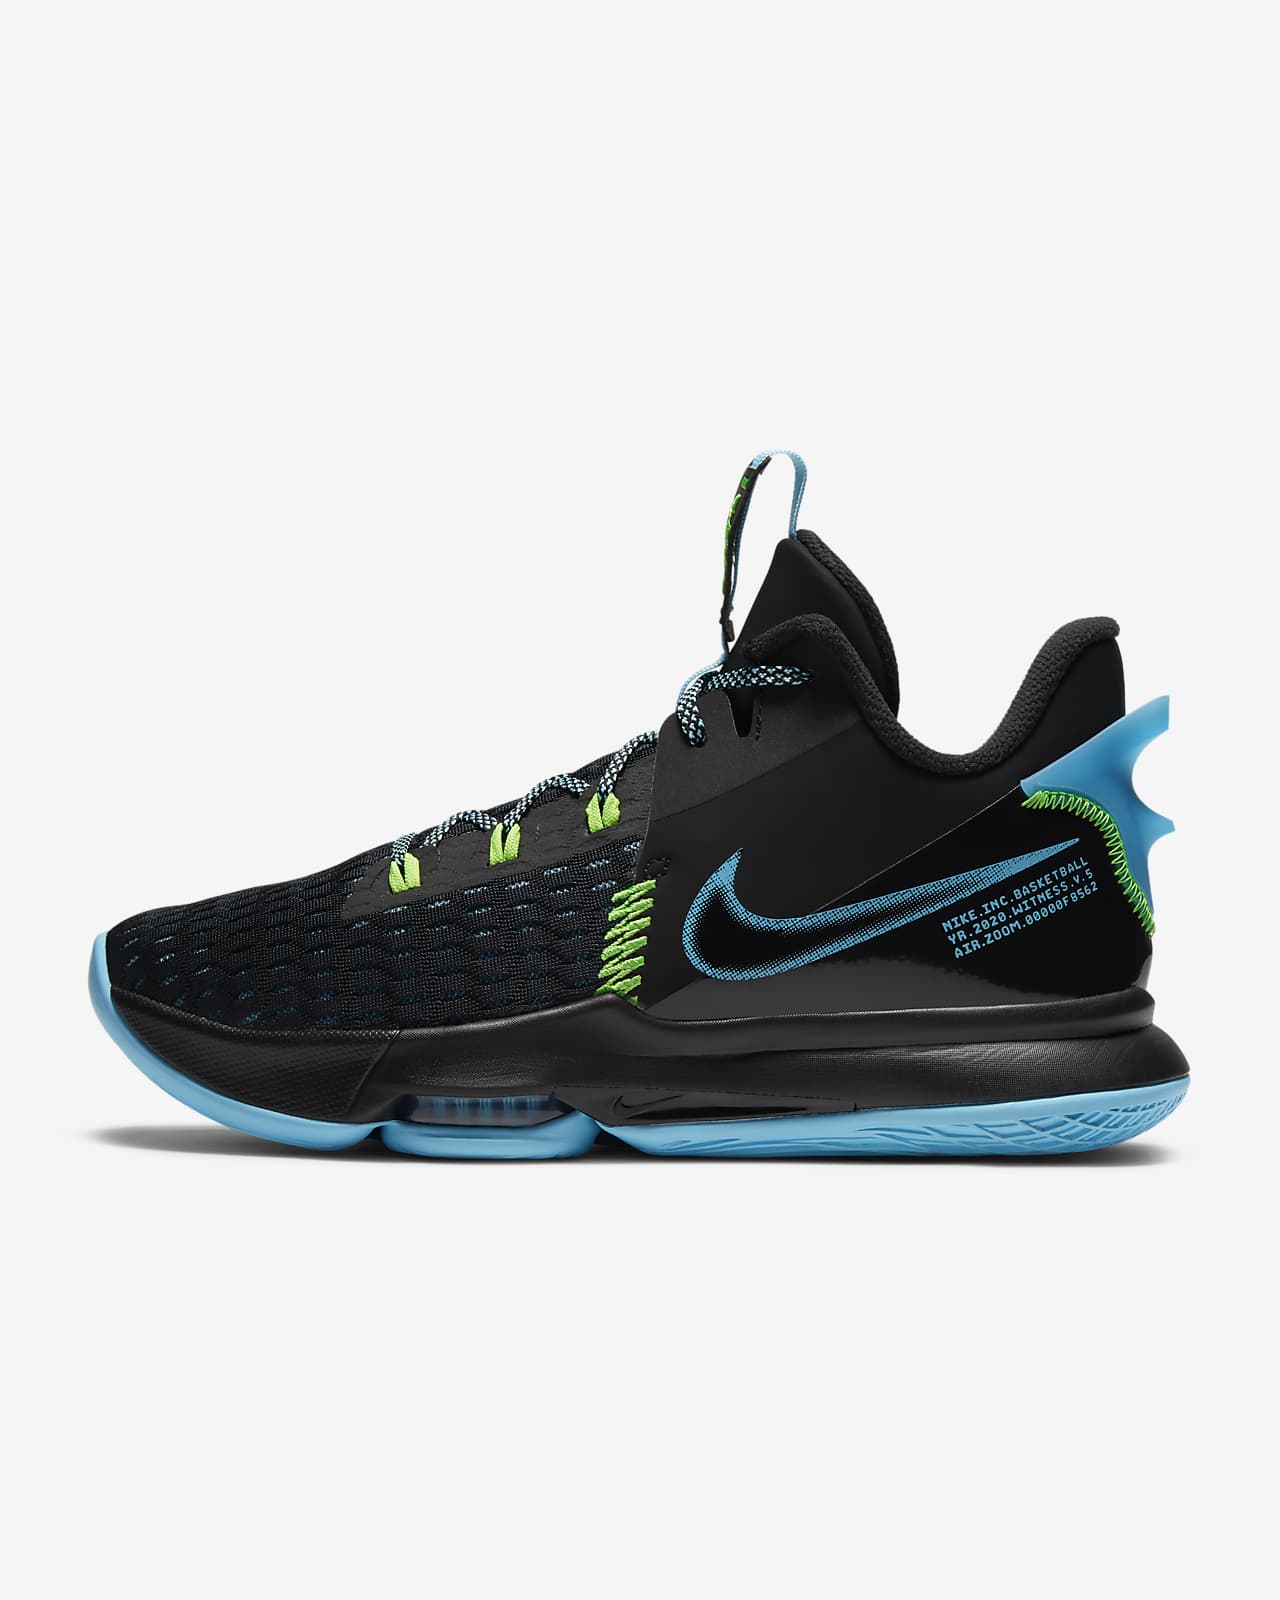 is lebron witness 3 good for outdoor